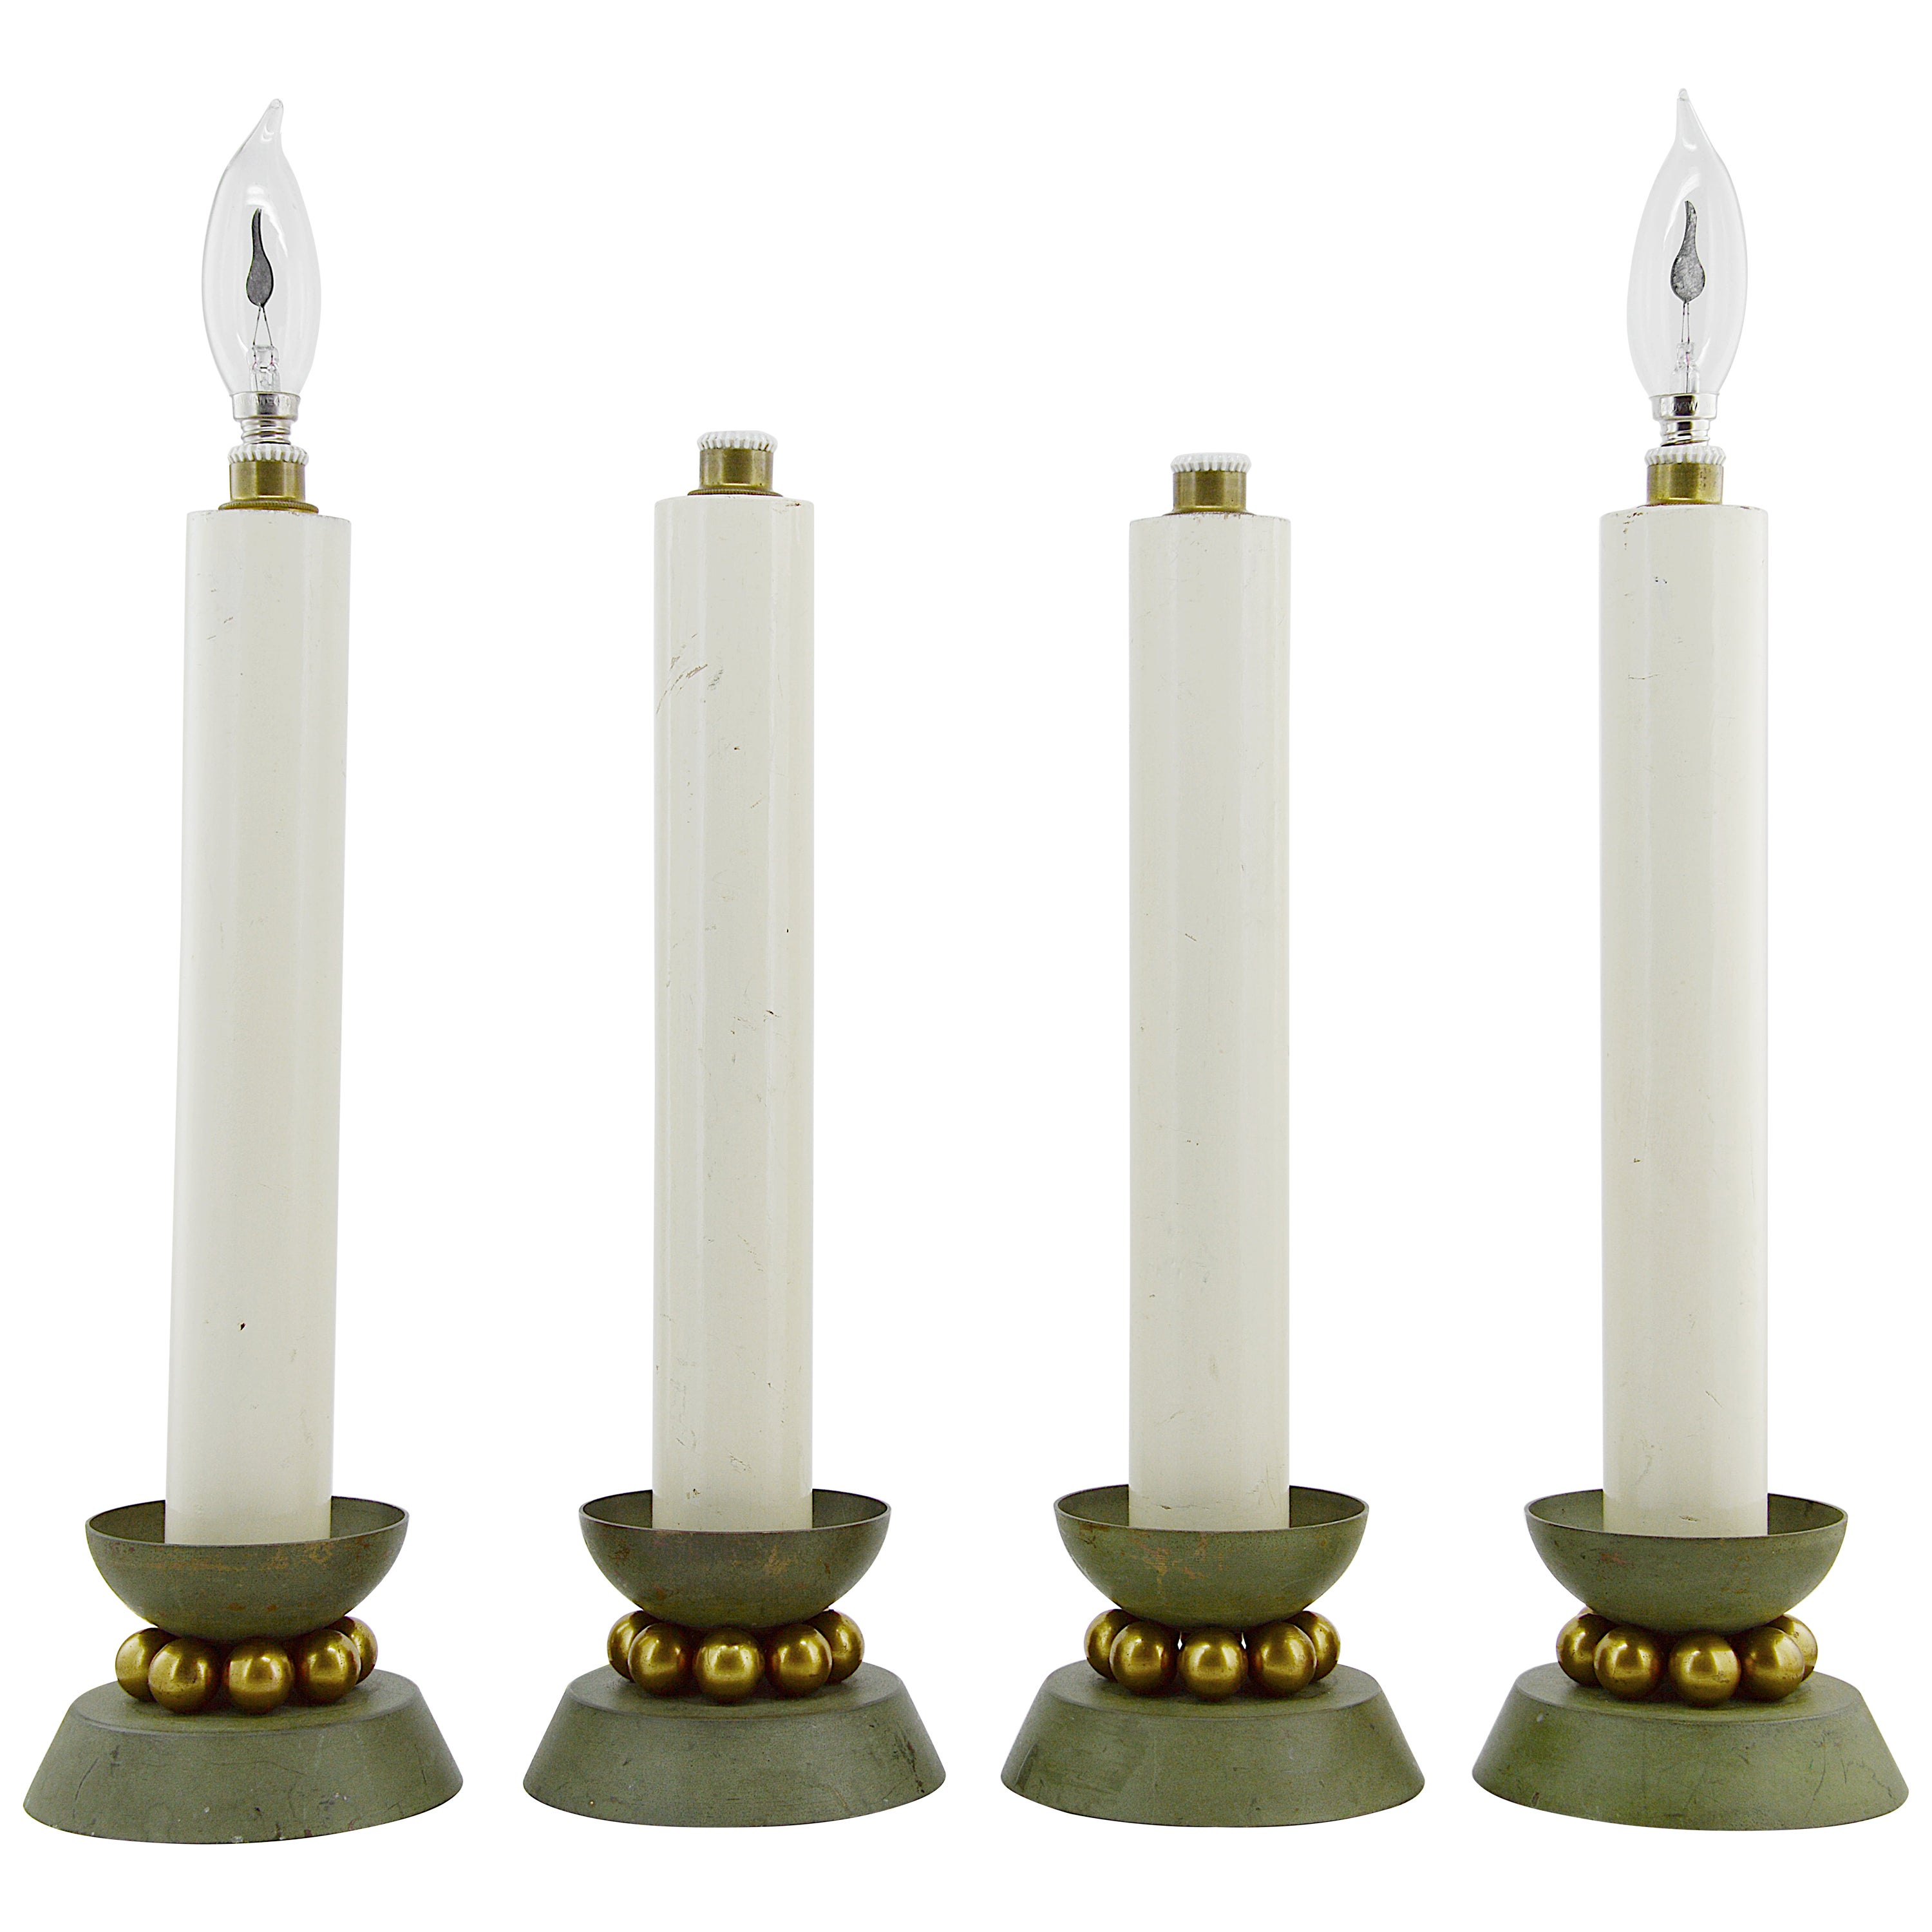 Exceptional and Decorative Set of Four Art Deco Candlestick Lamps, 1930s For Sale